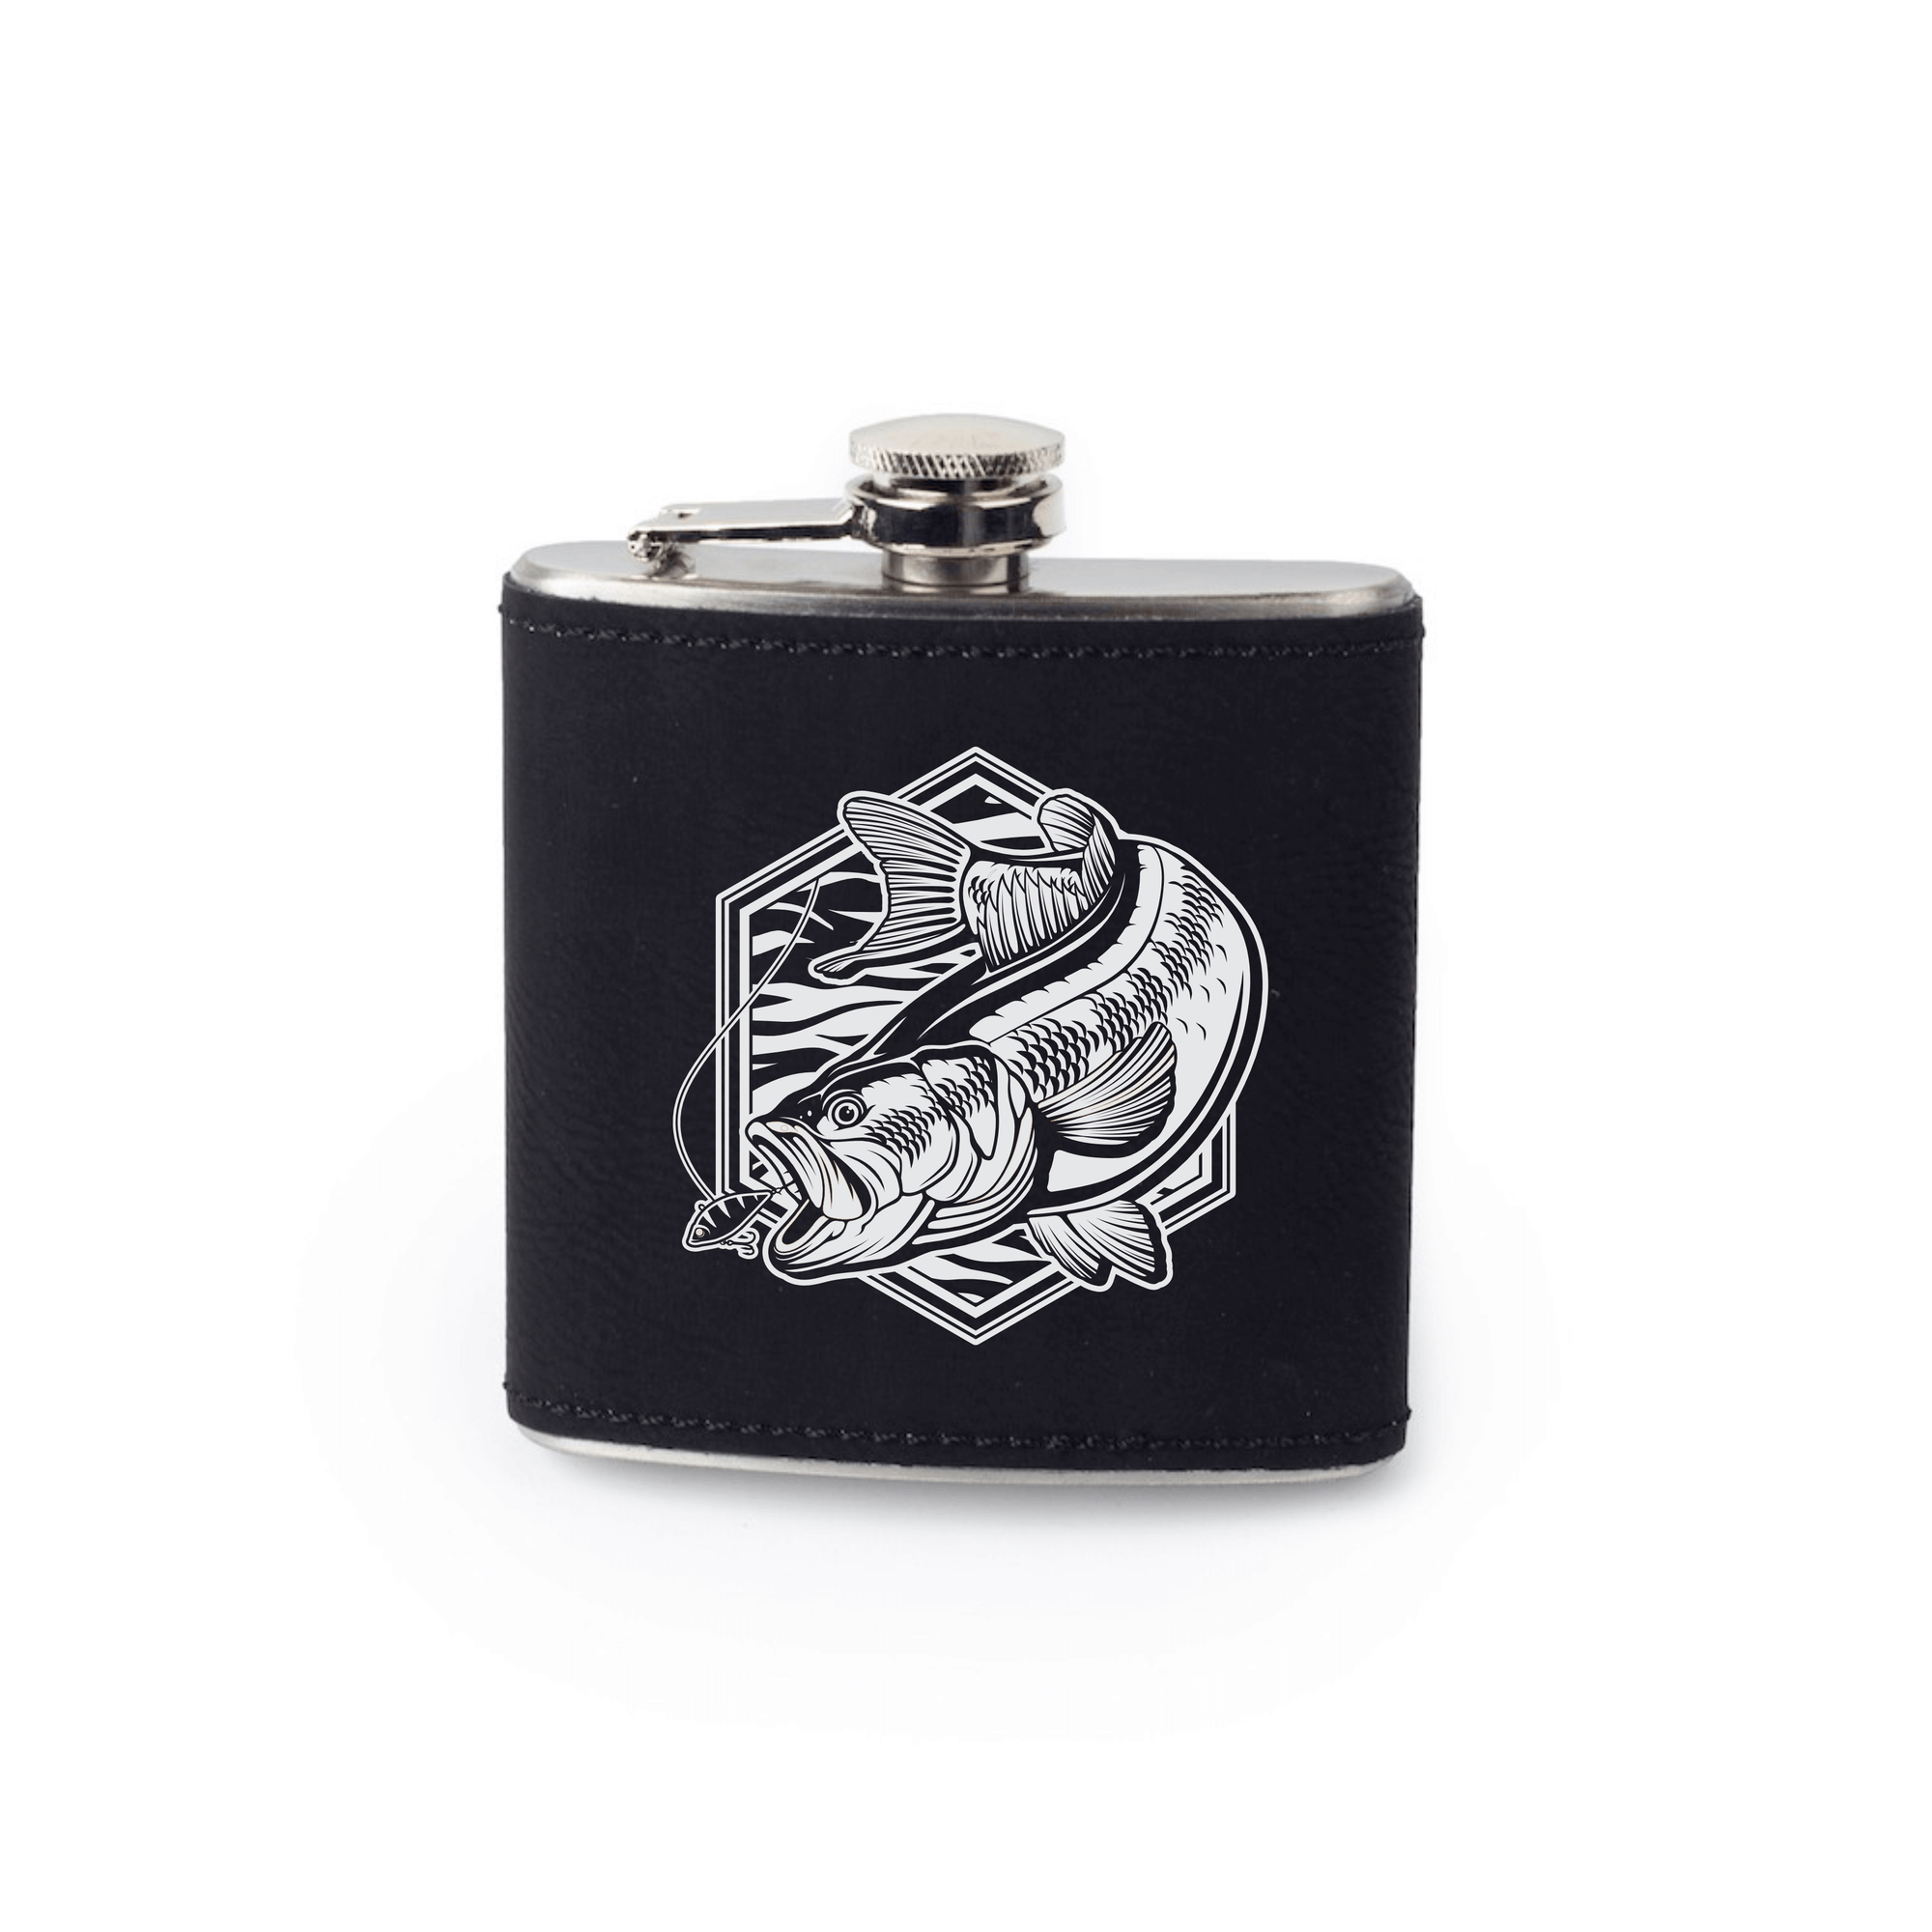 Bass Fishing Flask with bass artwork by Joel Jensen Art laser engraved - silver on black leather